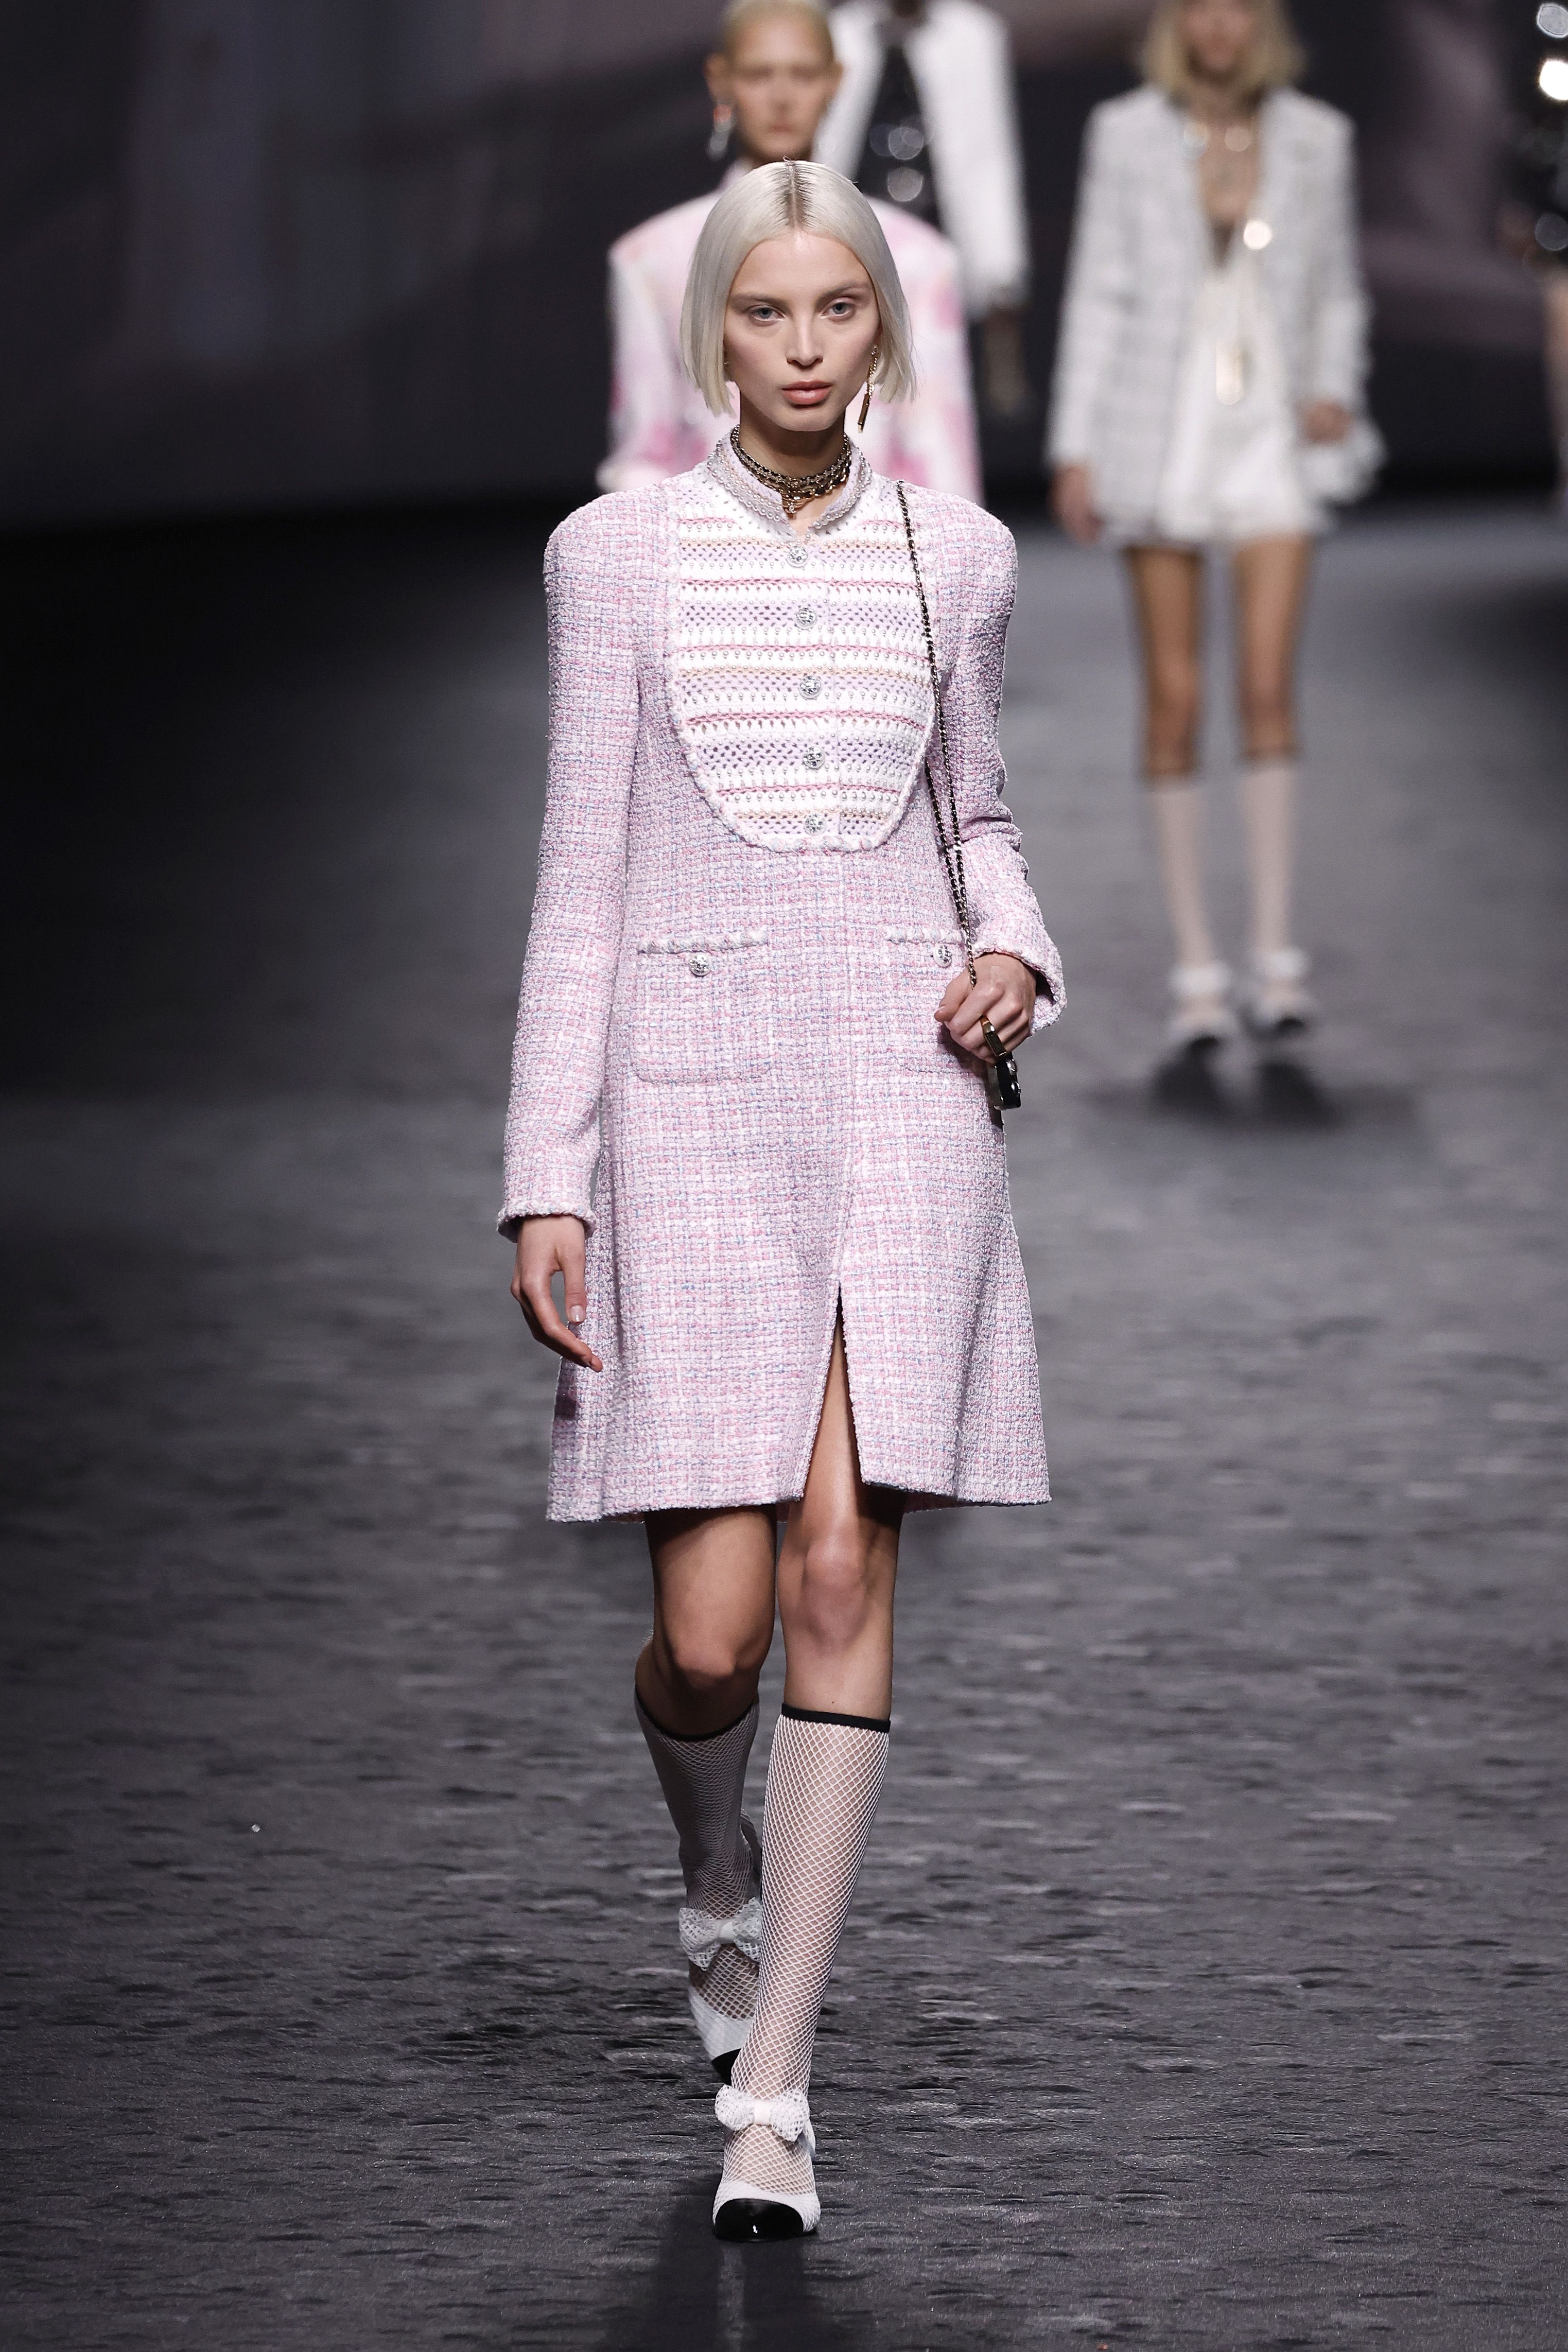 Paris Fashion Week 2023: Top 5 trends seen at Chanel, Hermès, Louis Vuitton  and more